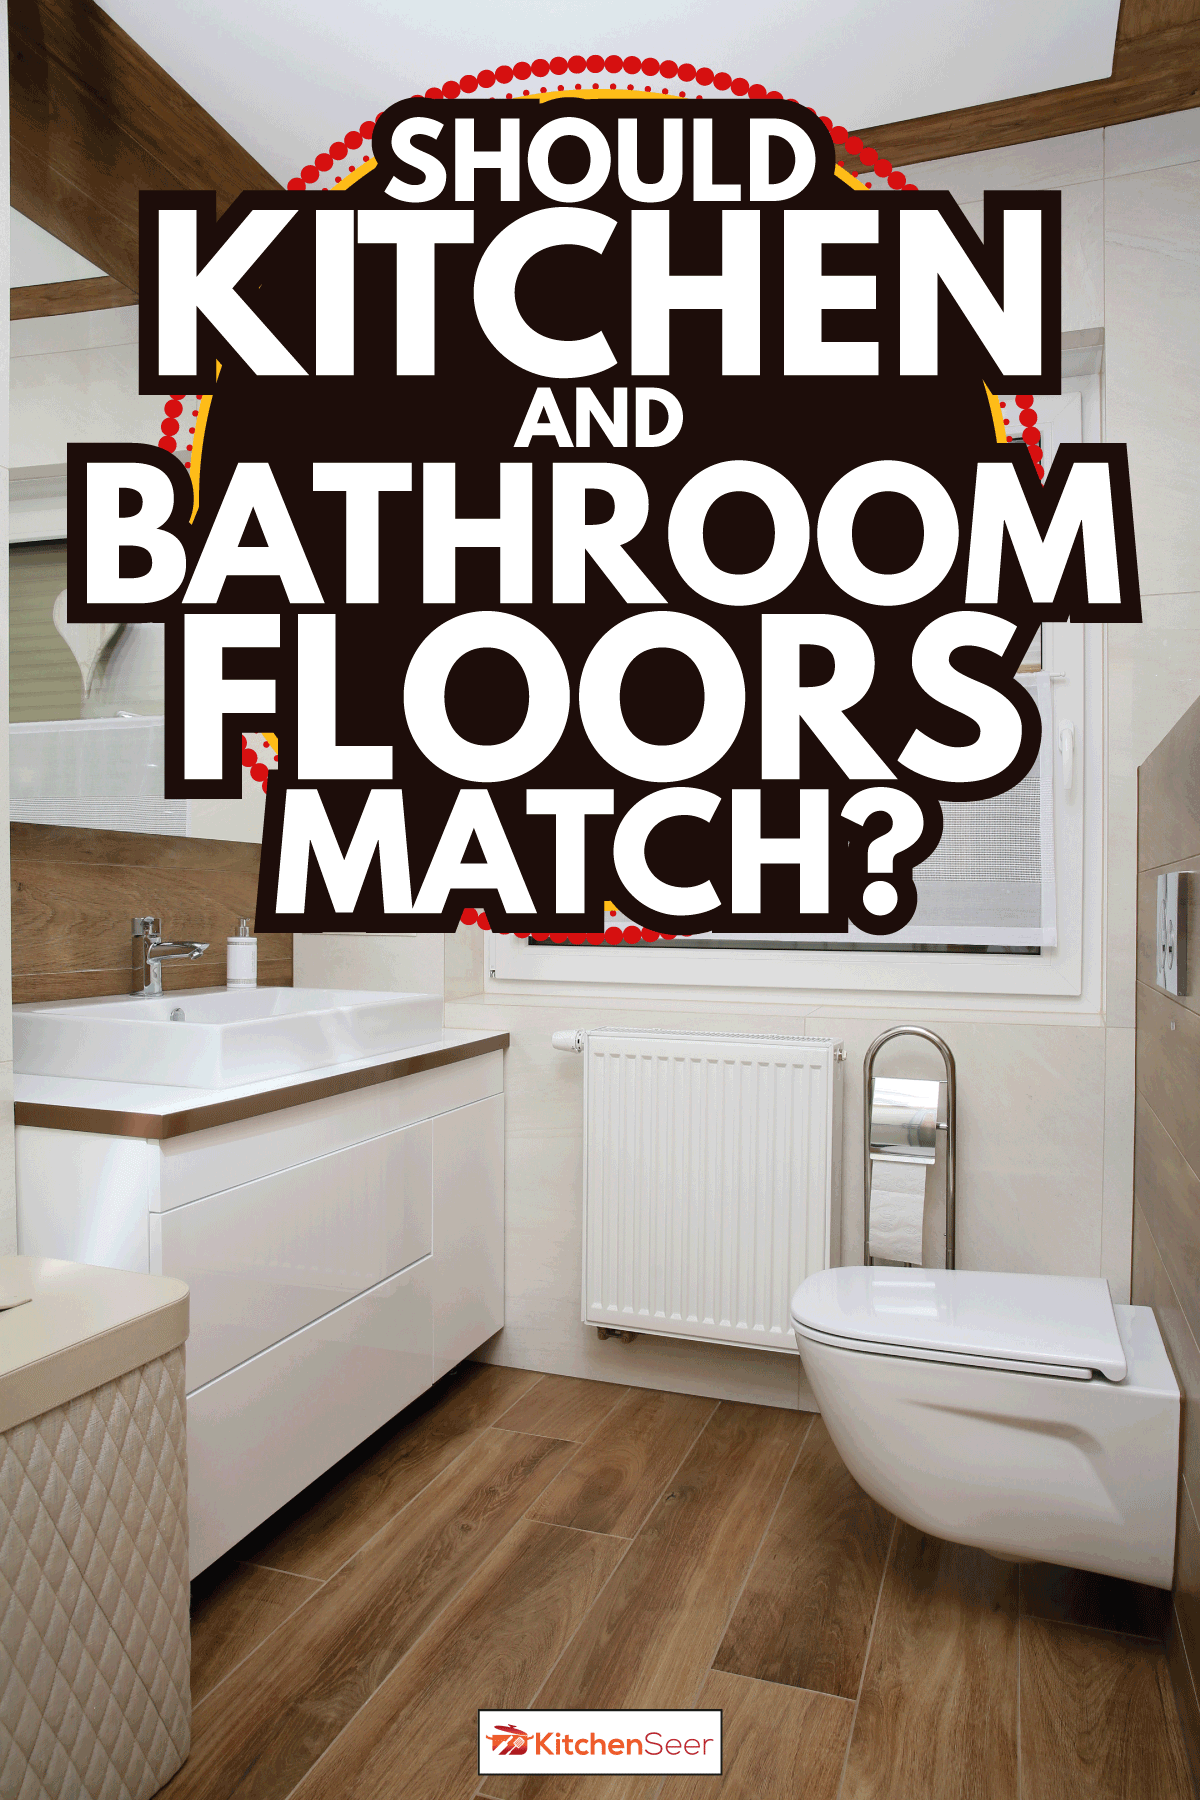 Bathroom Floors Match Kitchen, What Flooring Is Best For Kitchens And Bathrooms